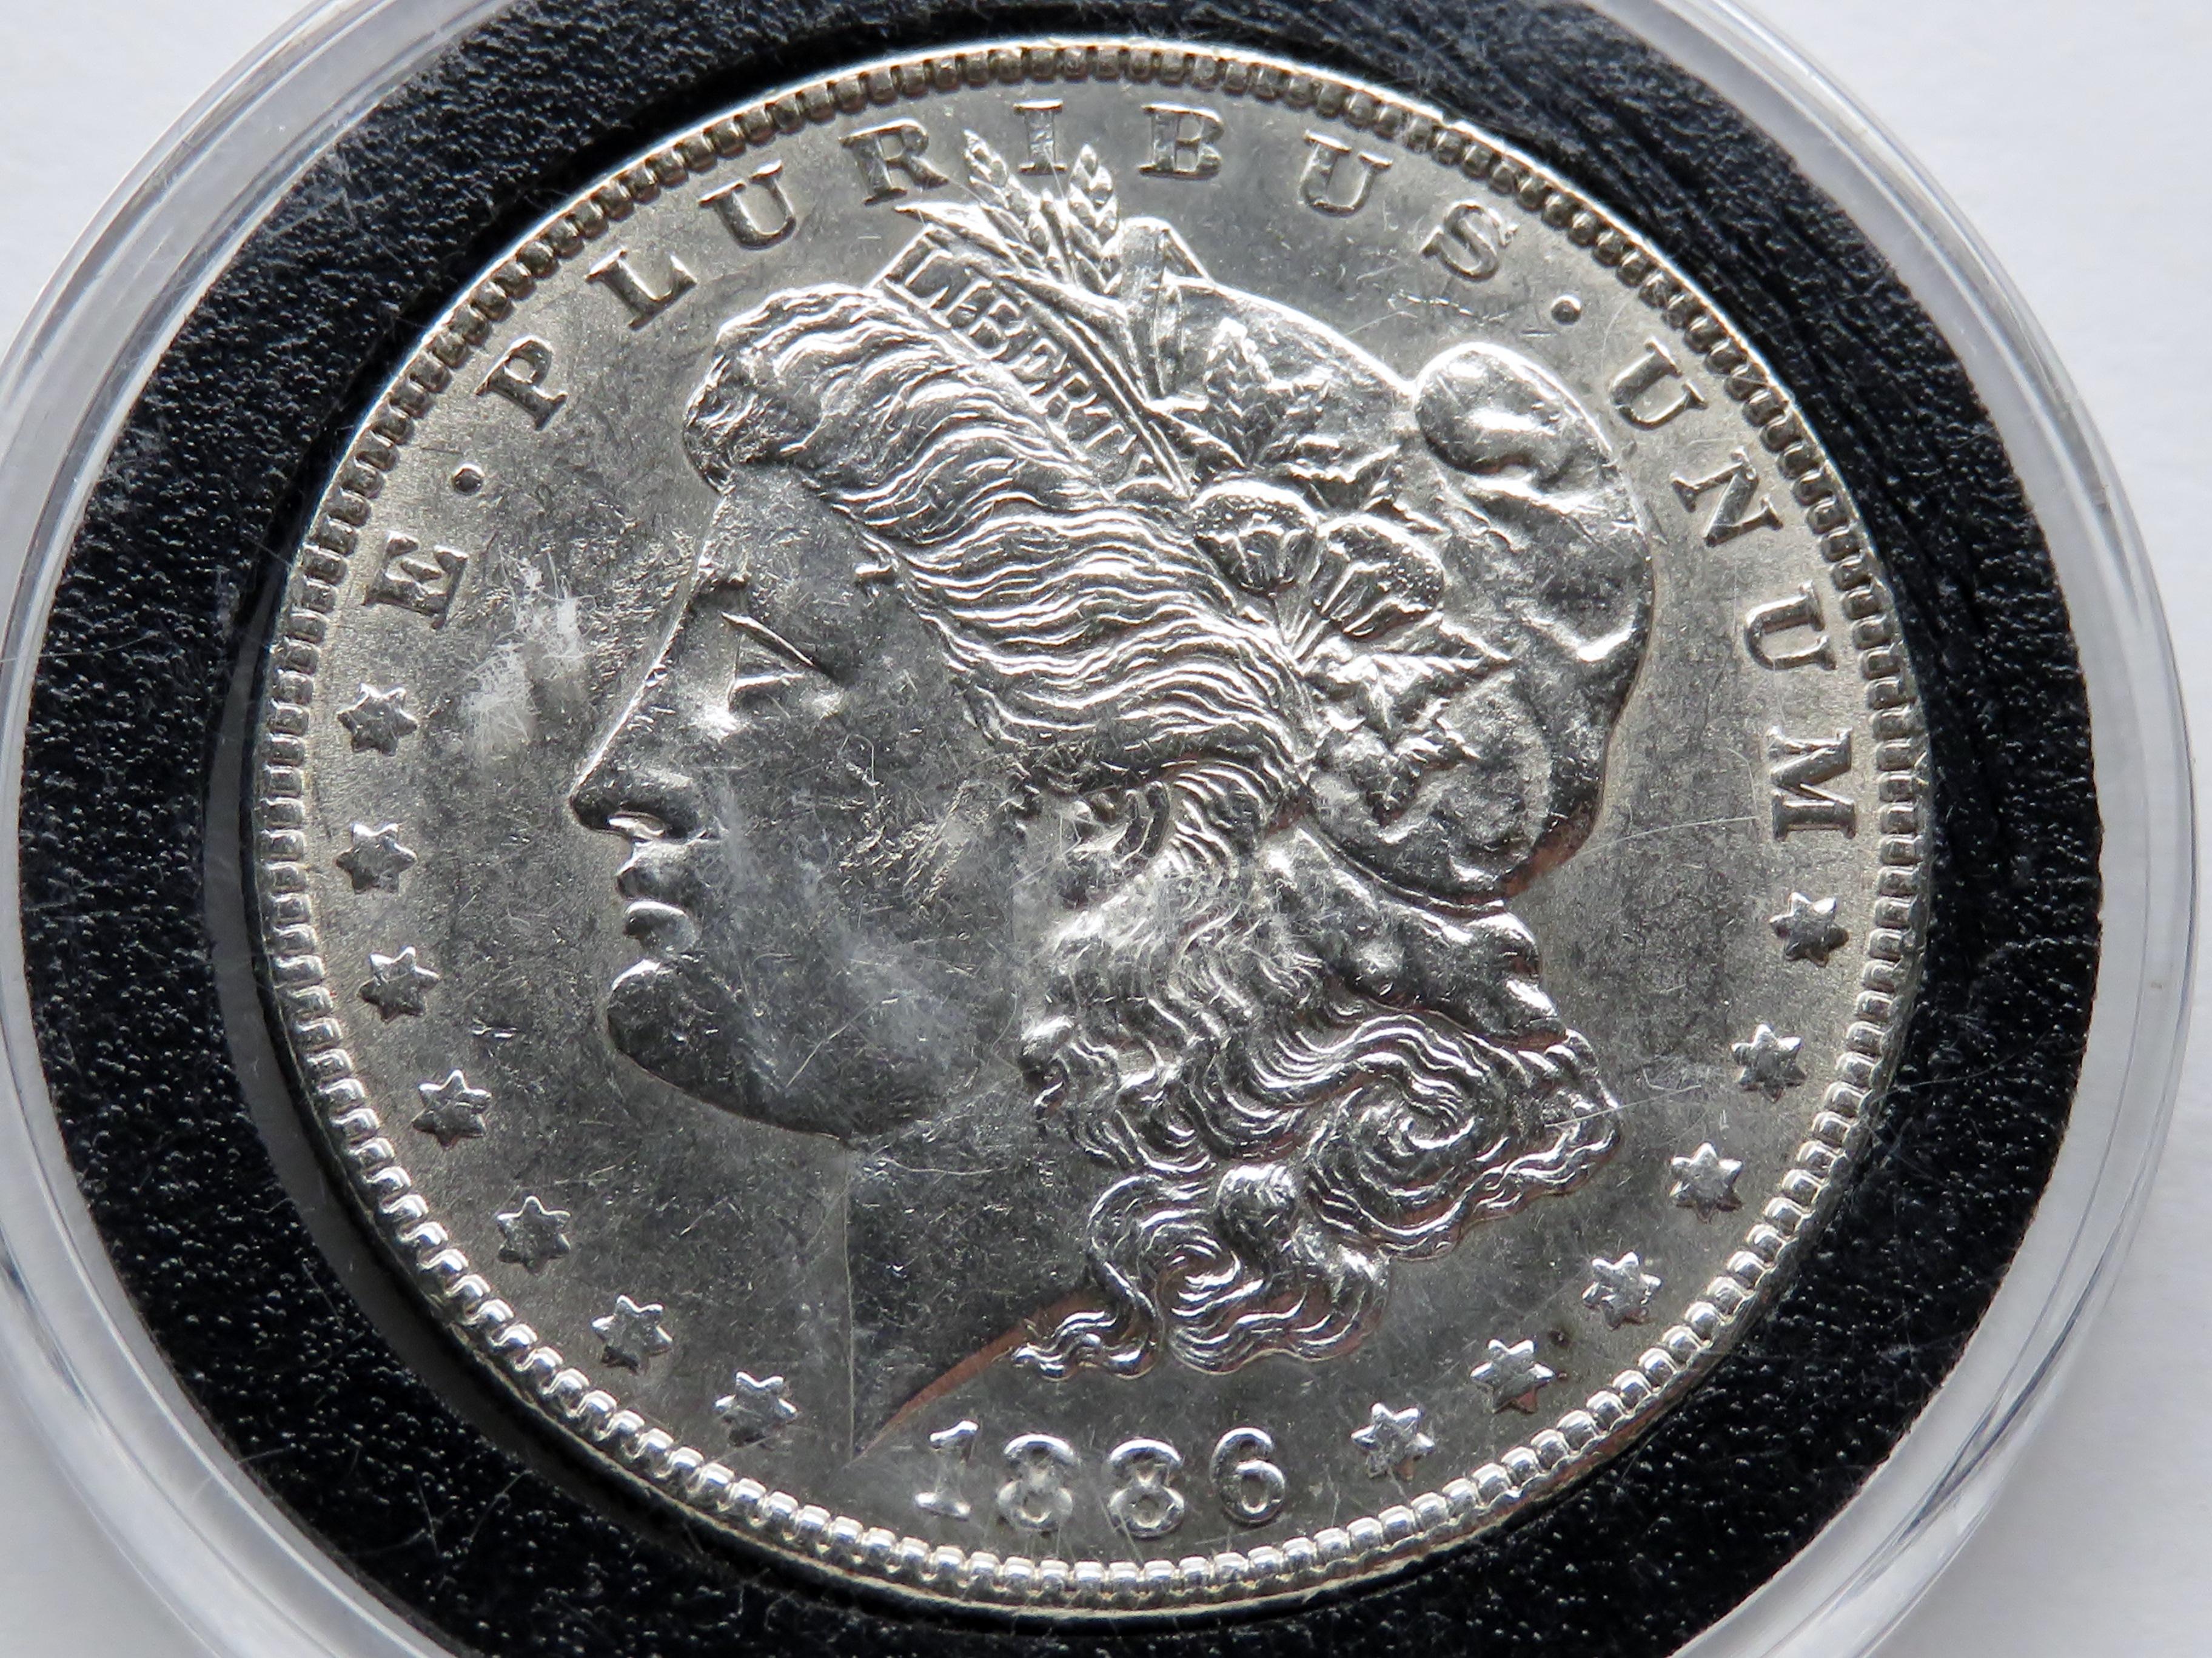 Morgan $ 1886 Unc obv bag marks, in Cointain